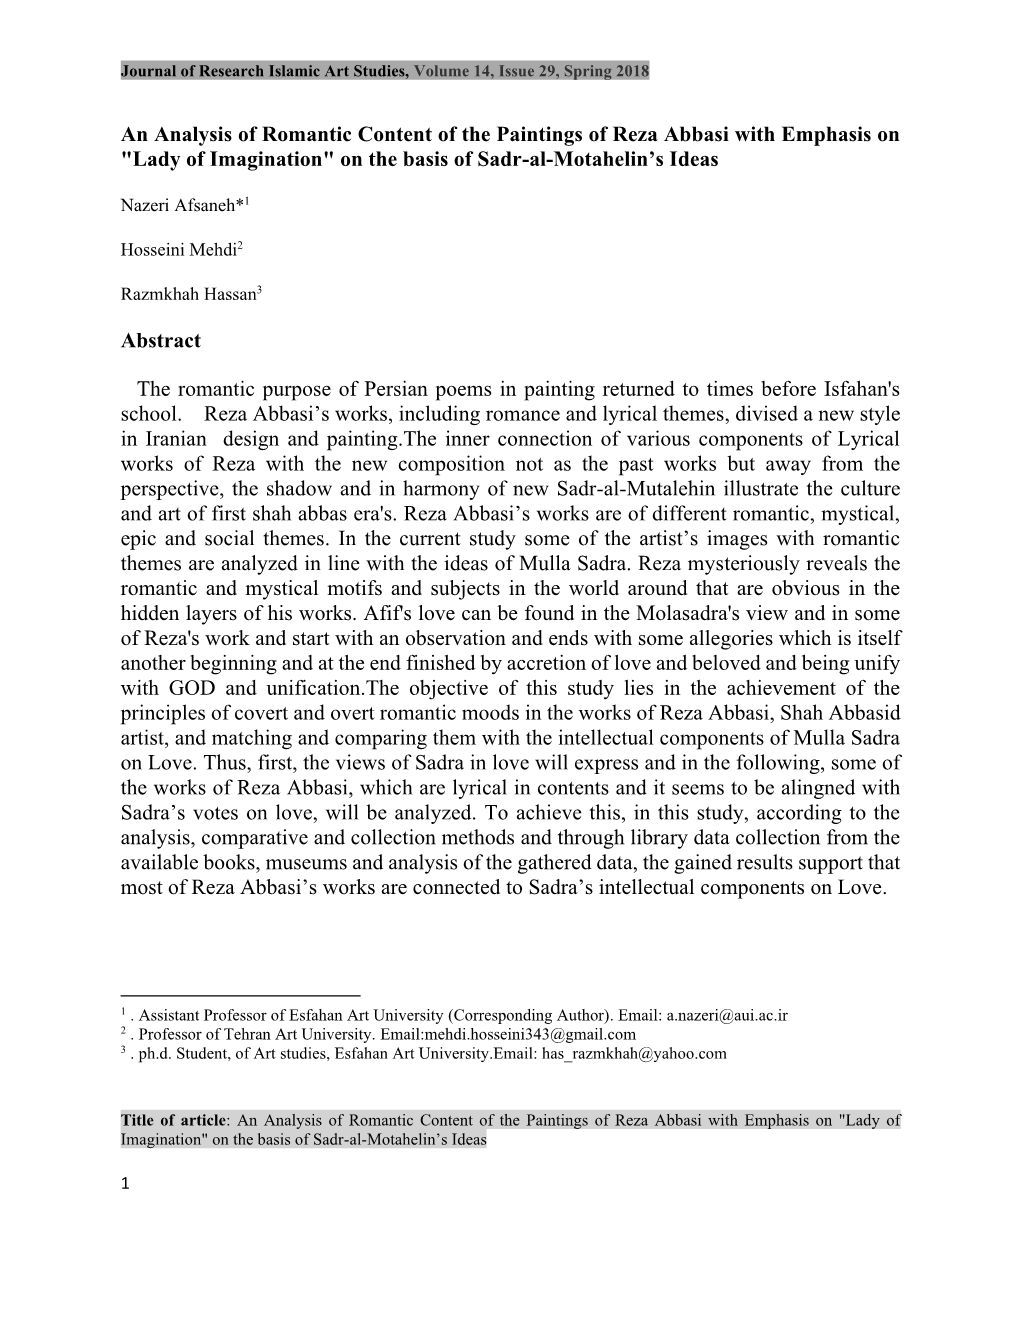 An Analysis of Romantic Content of the Paintings of Reza Abbasi with Emphasis on "Lady of Imagination" on the Basis of Sadr-Al-Motahelin’S Ideas